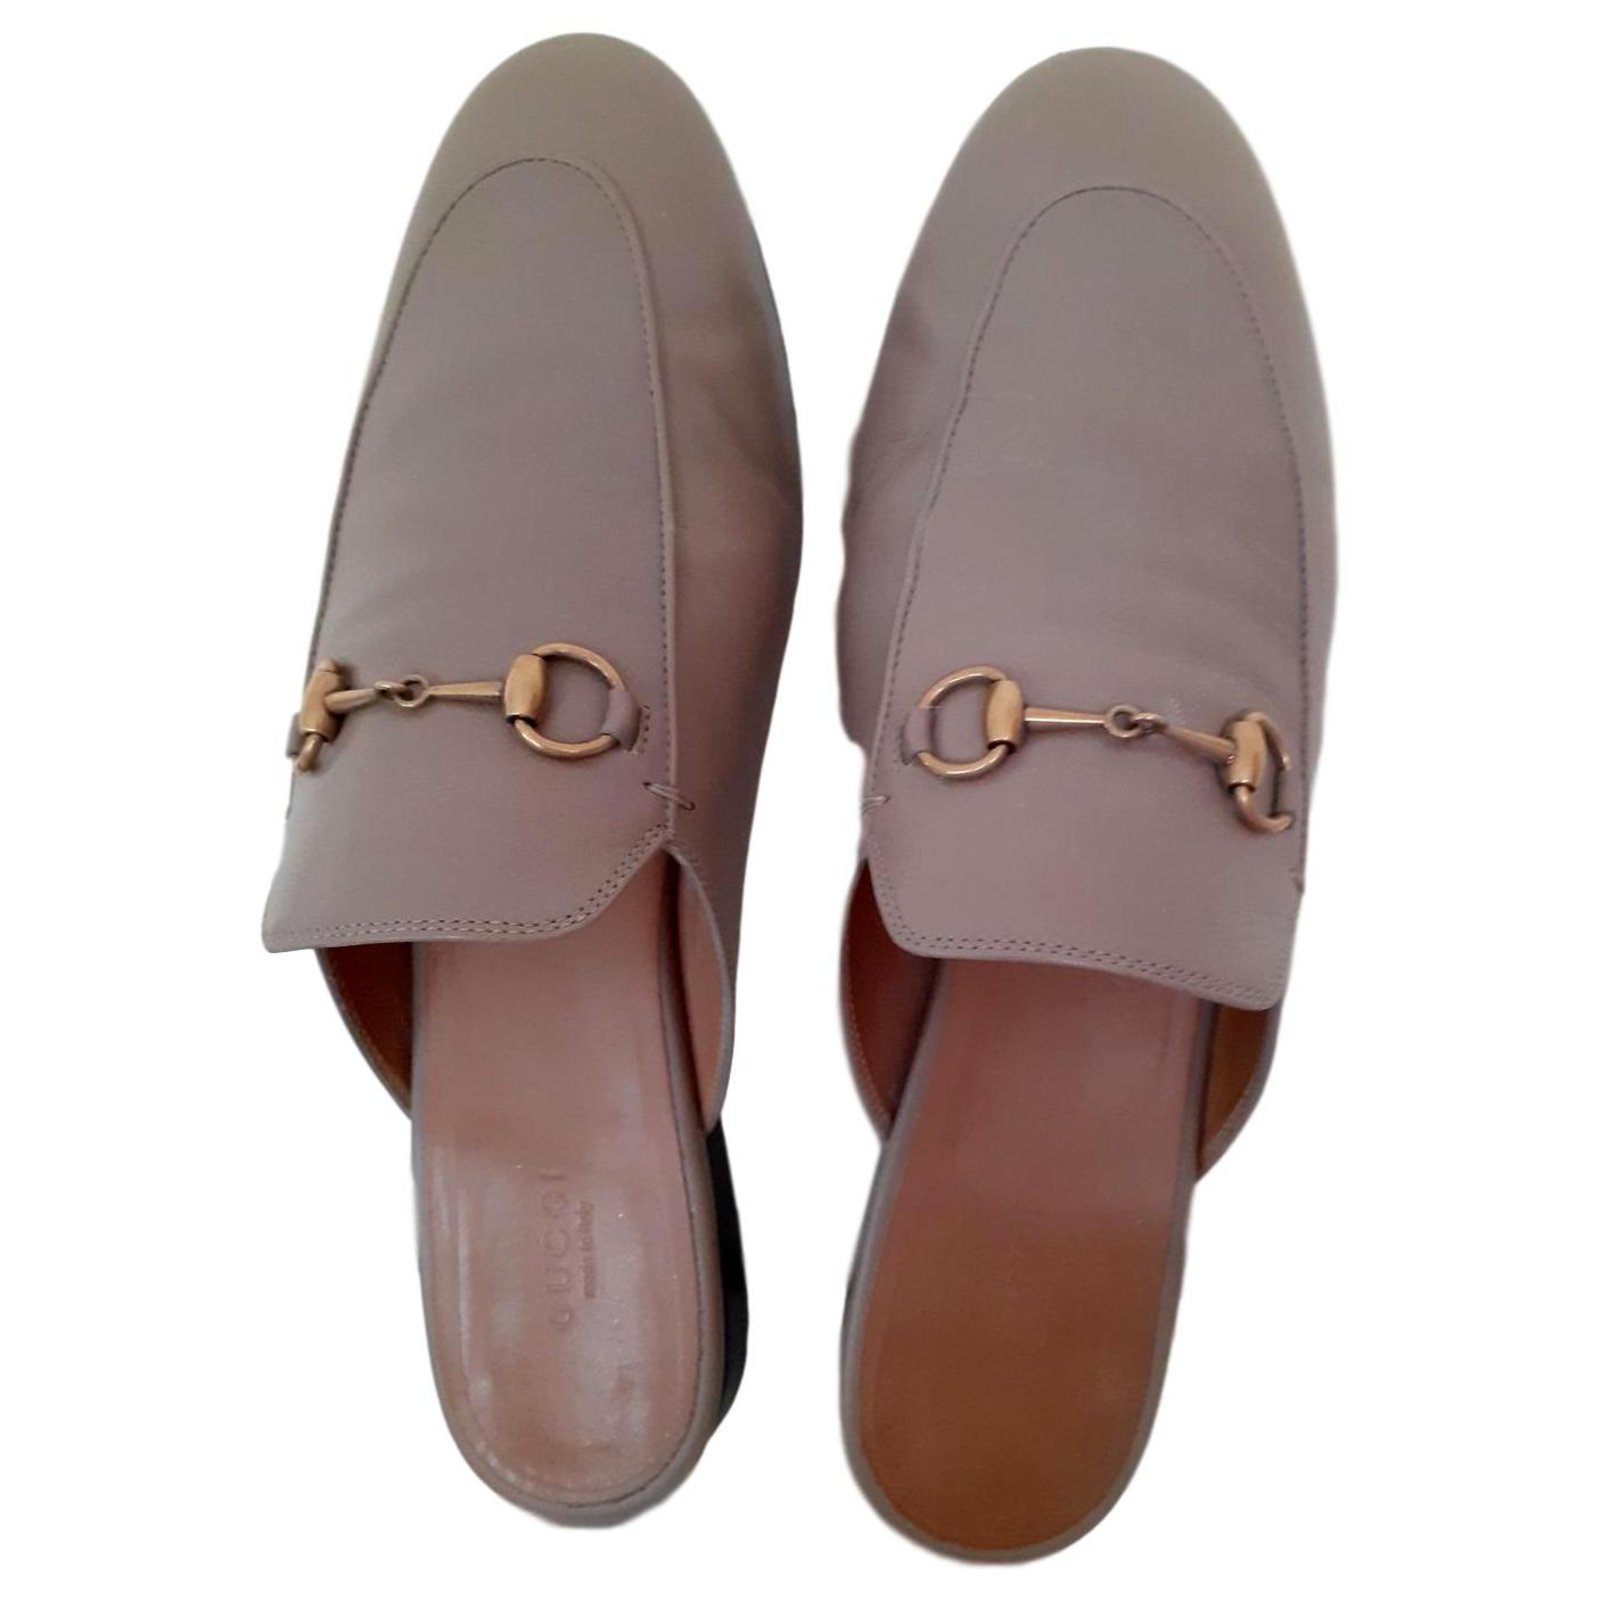 Gucci Gucci Princetown Flats Leather 